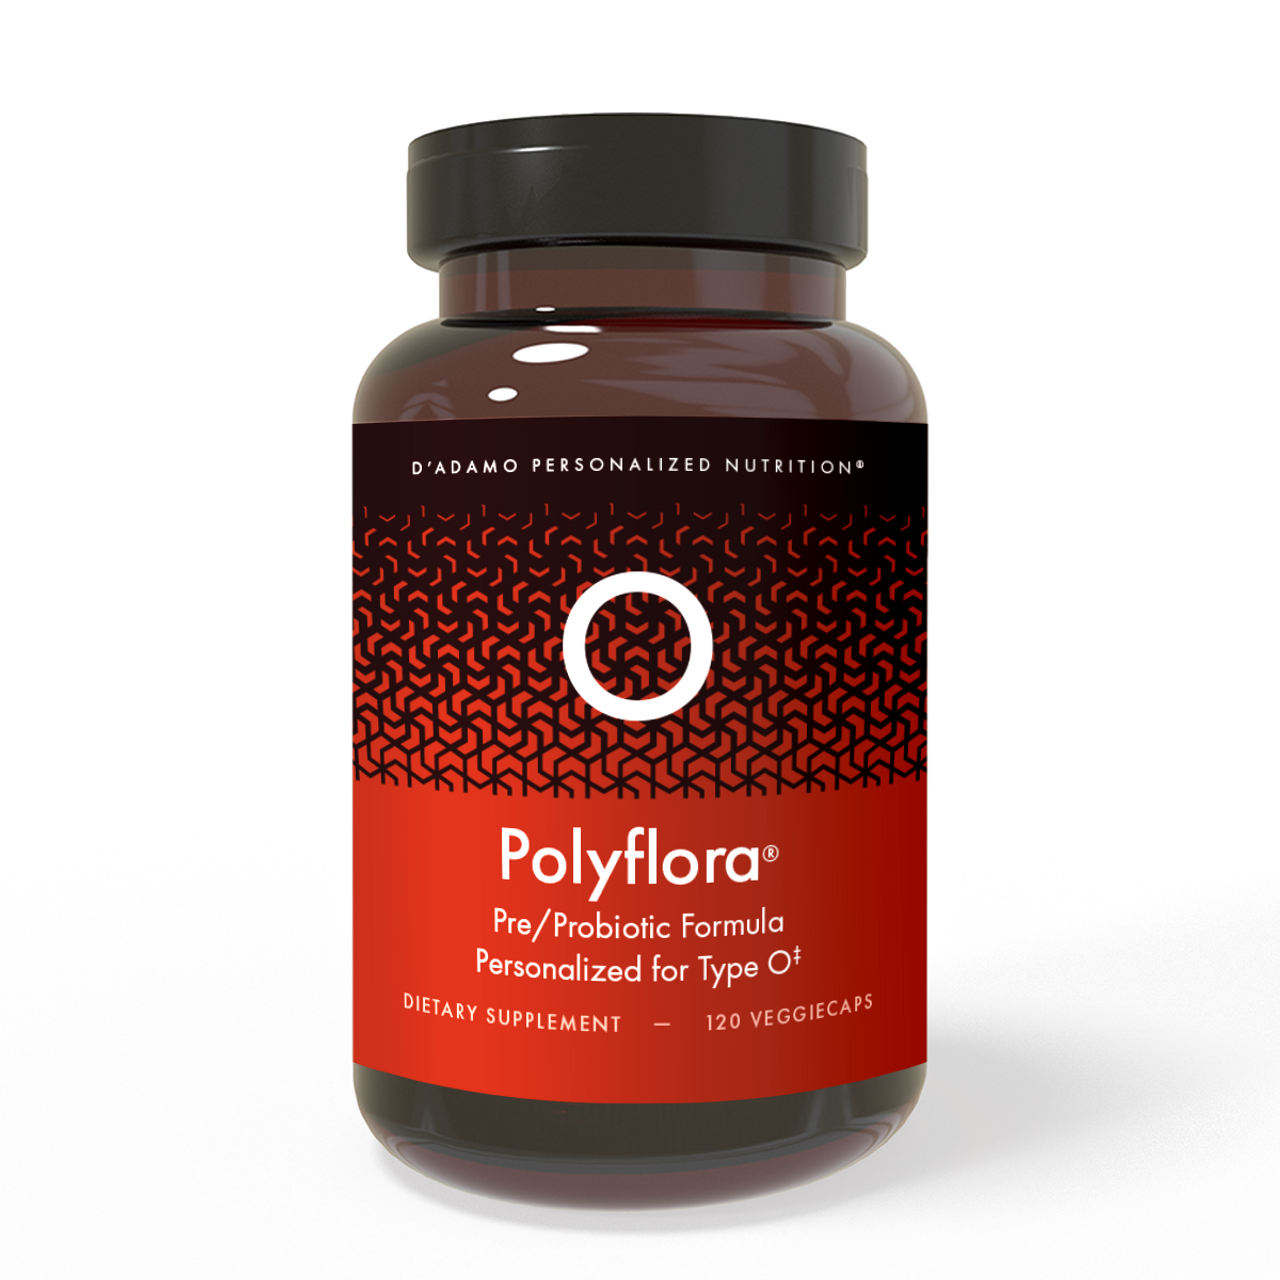 Polyflora - Pre-Probiotic (Blood Type O) - personalized probiotic with flora specifically beneficial for Blood Type O. Also includes prebiotic synergists to strengthen digestive health.